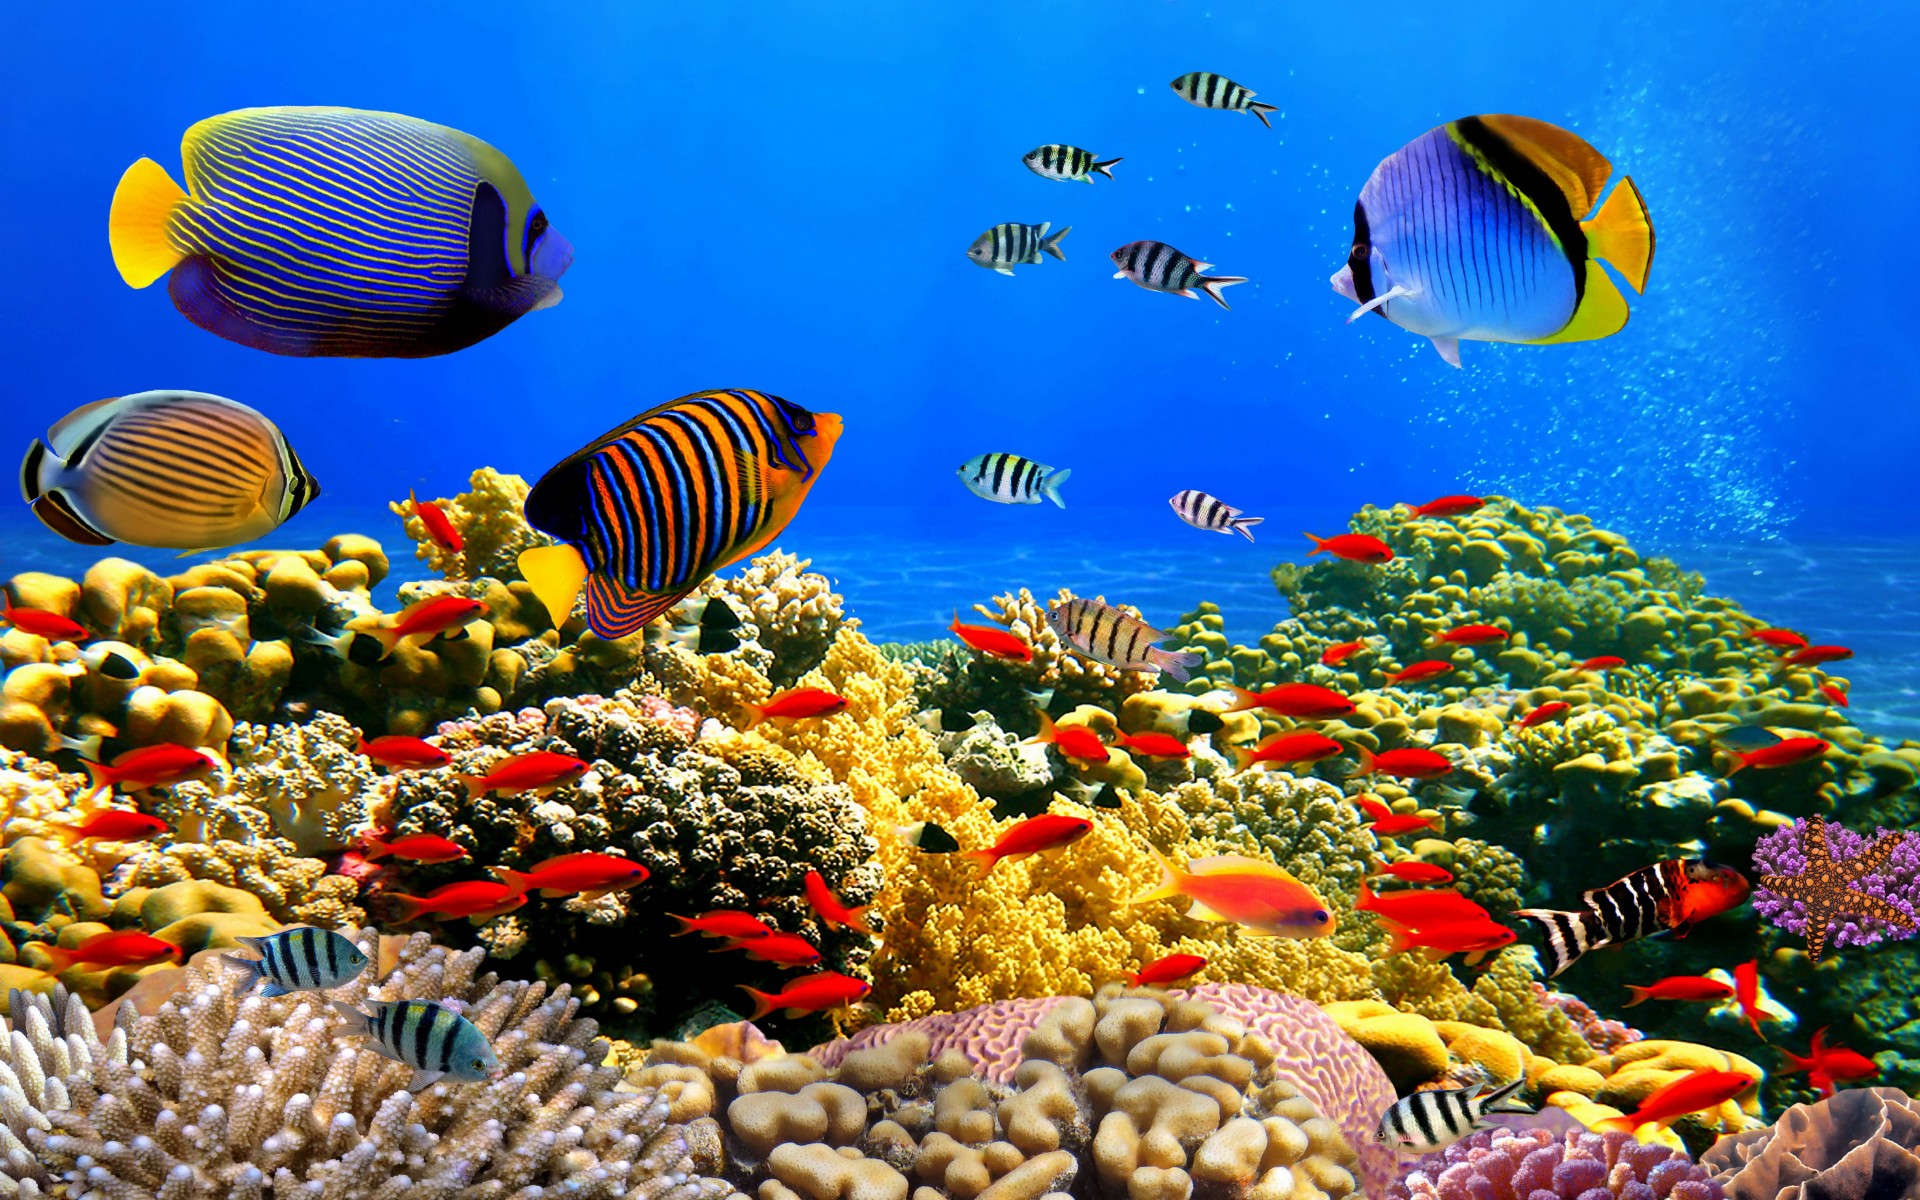 coral, tropical fish, plant, animal, fish, colorful, colors, coral reef, ocean, underwater, fishes